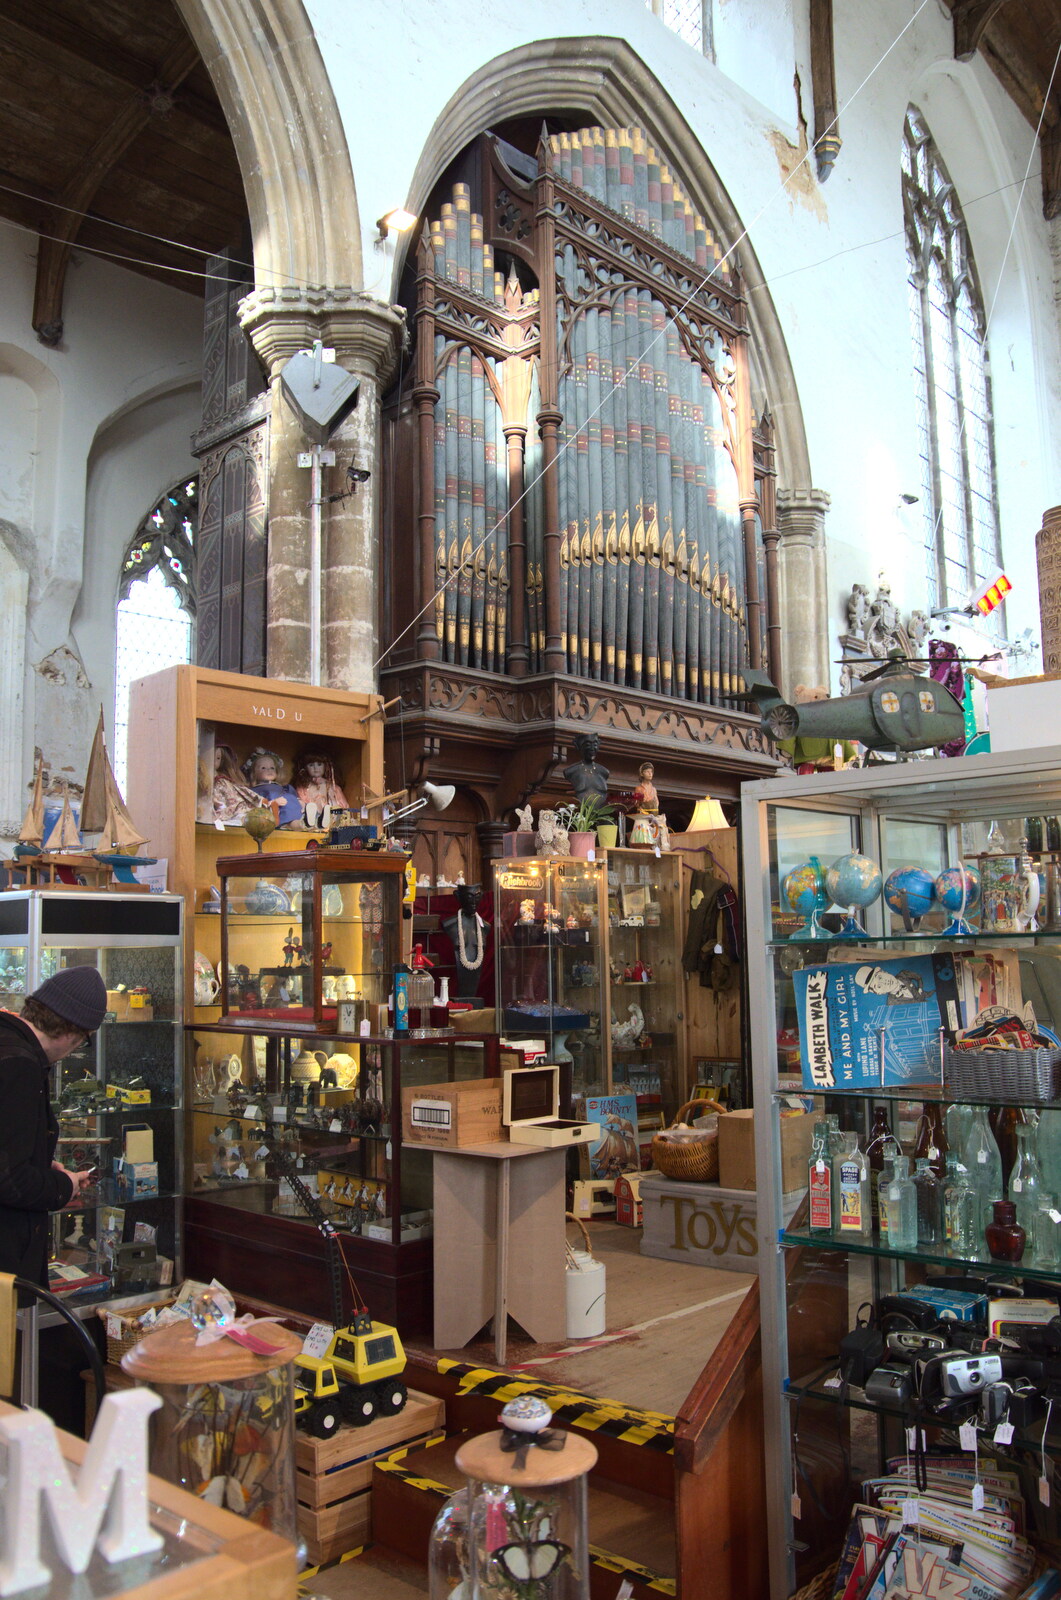 The church organ, hidden away from A Trip to Cooke's Music, St. Benedict's Street, Norwich - 14th March 2020